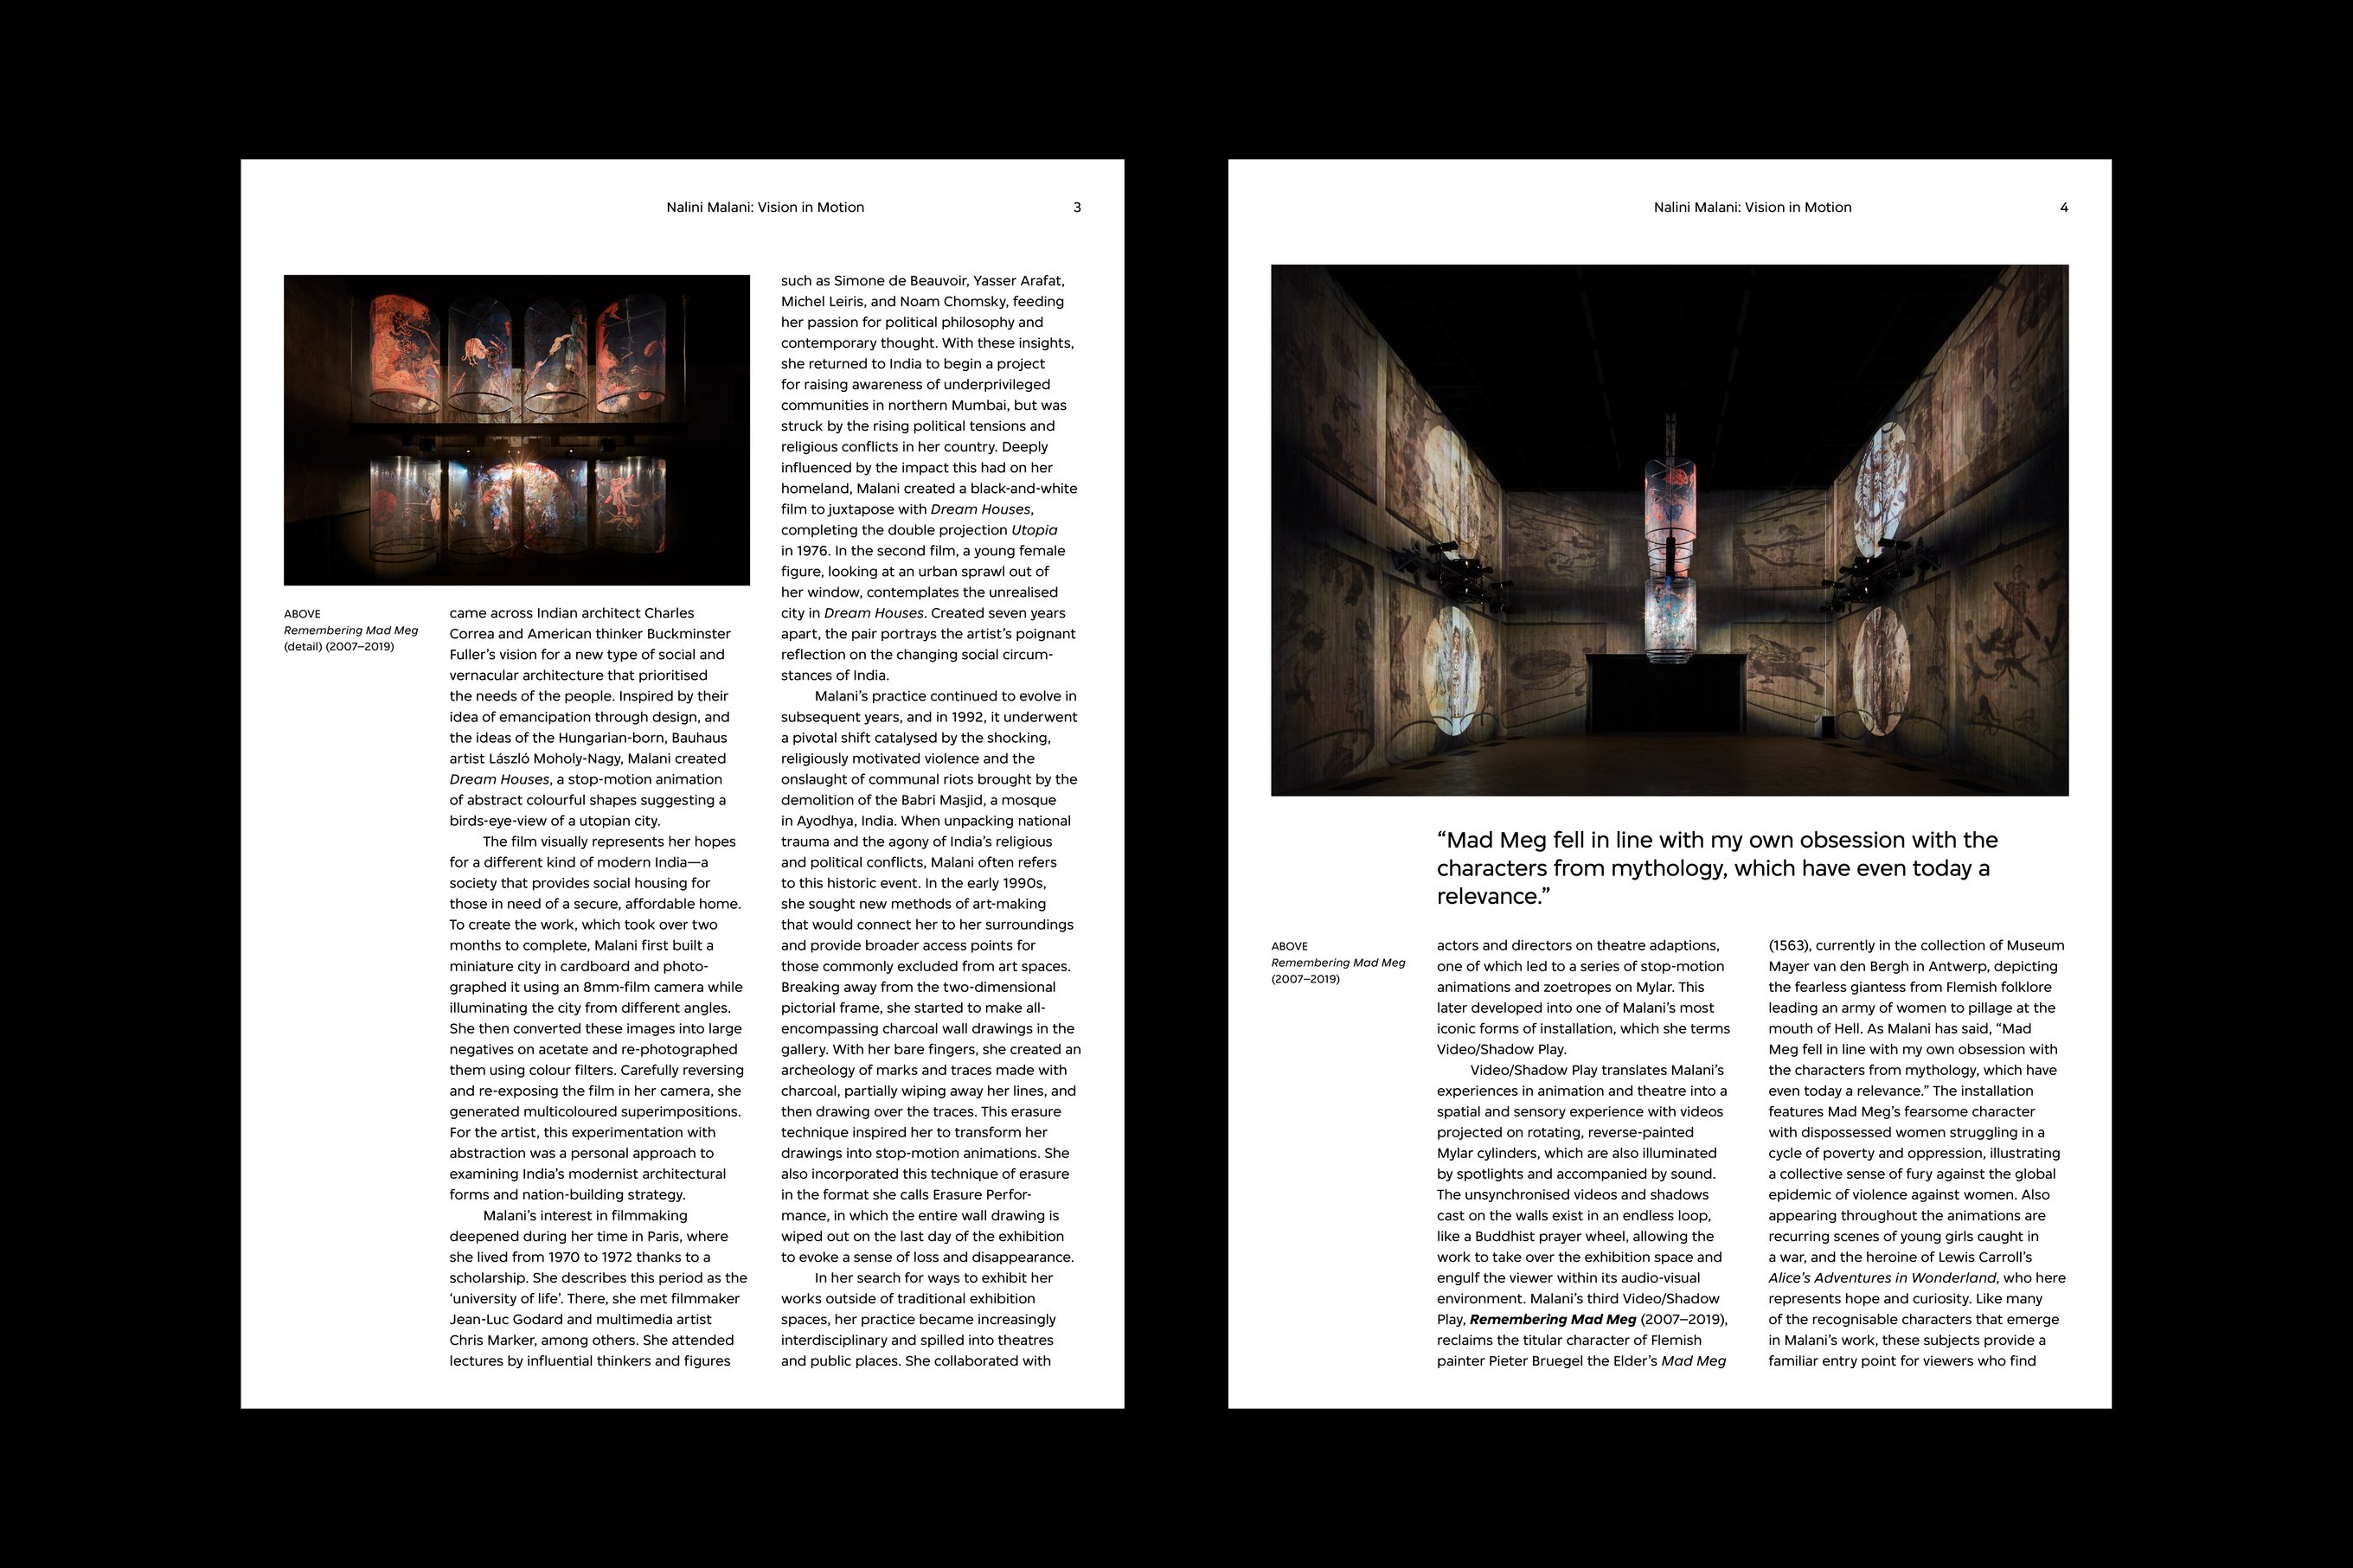 Essay page designs for the Nalini Malani exhibition brochure with images, captions, and pull quotes.